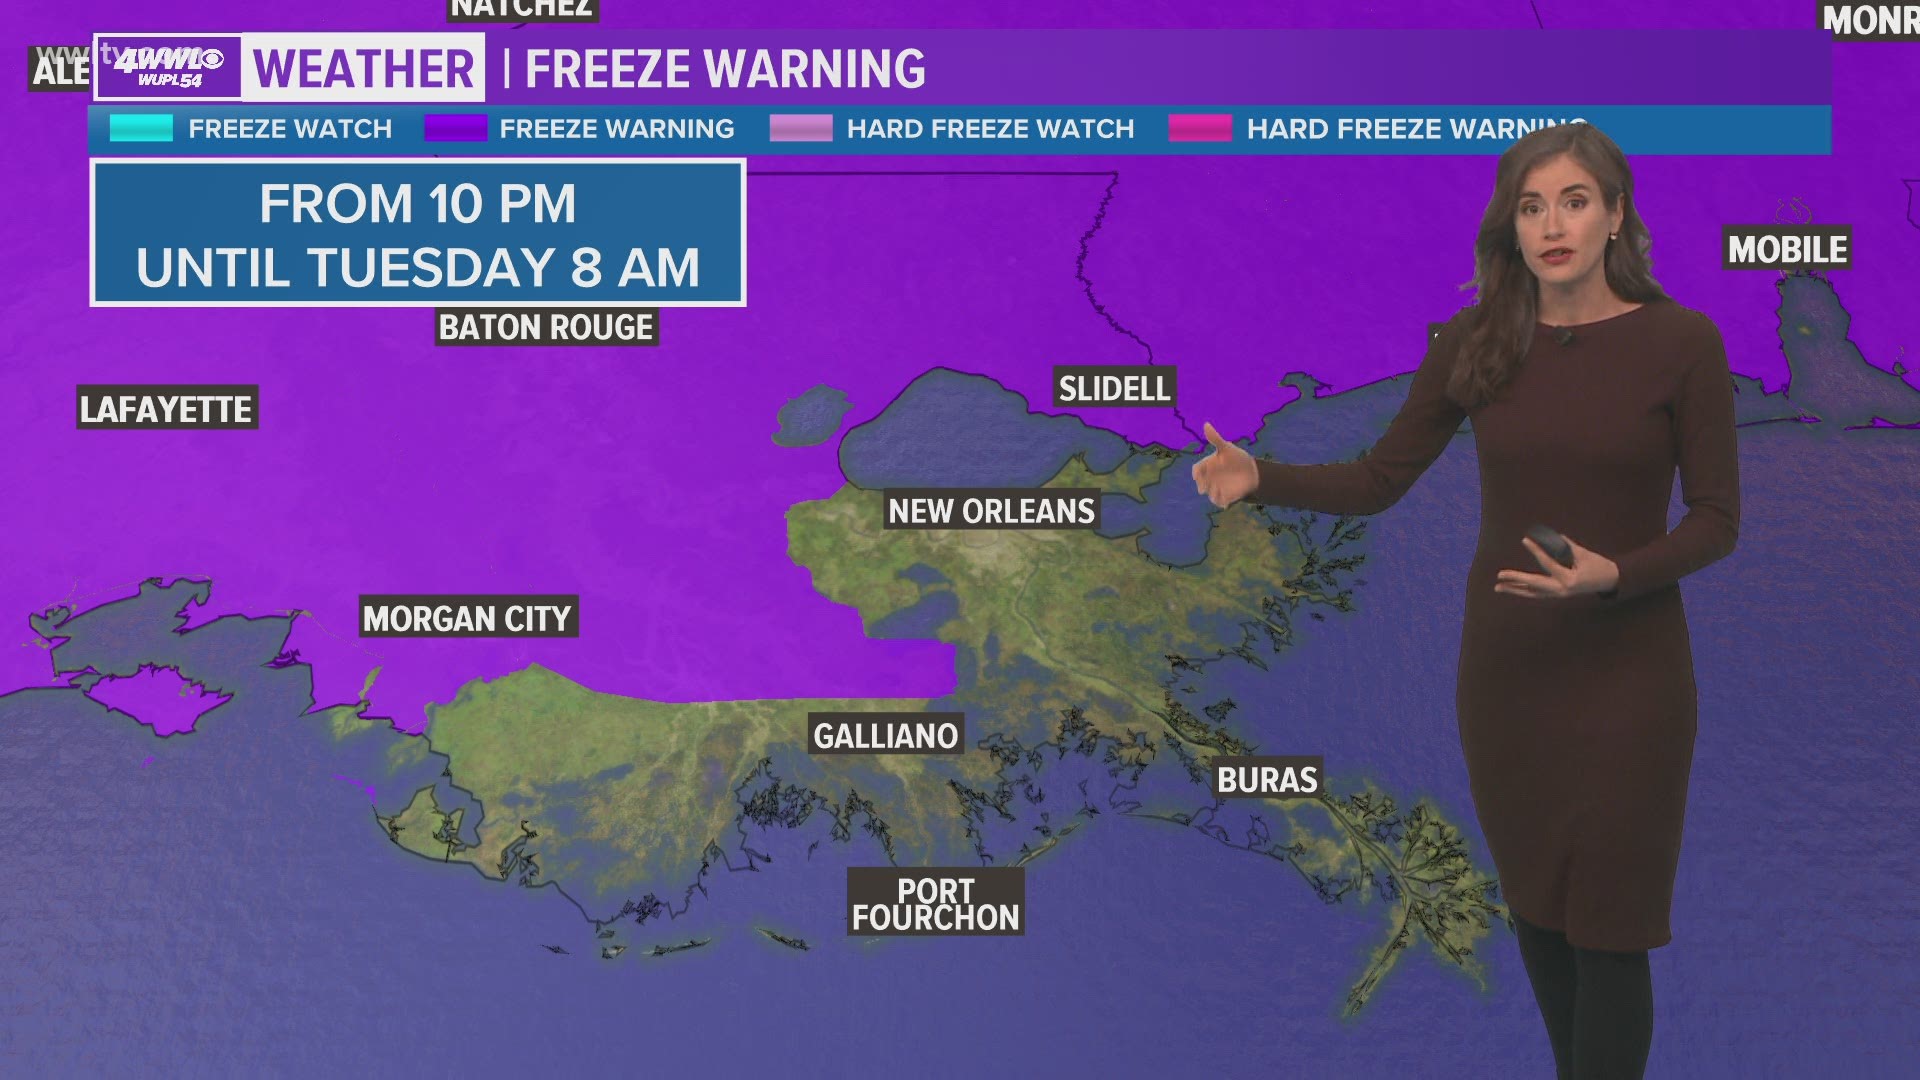 Meteorologist Alexandra Cranford has a look at a freeze warning for much of the area at 5 p.m. Monday, November 30, 2020.